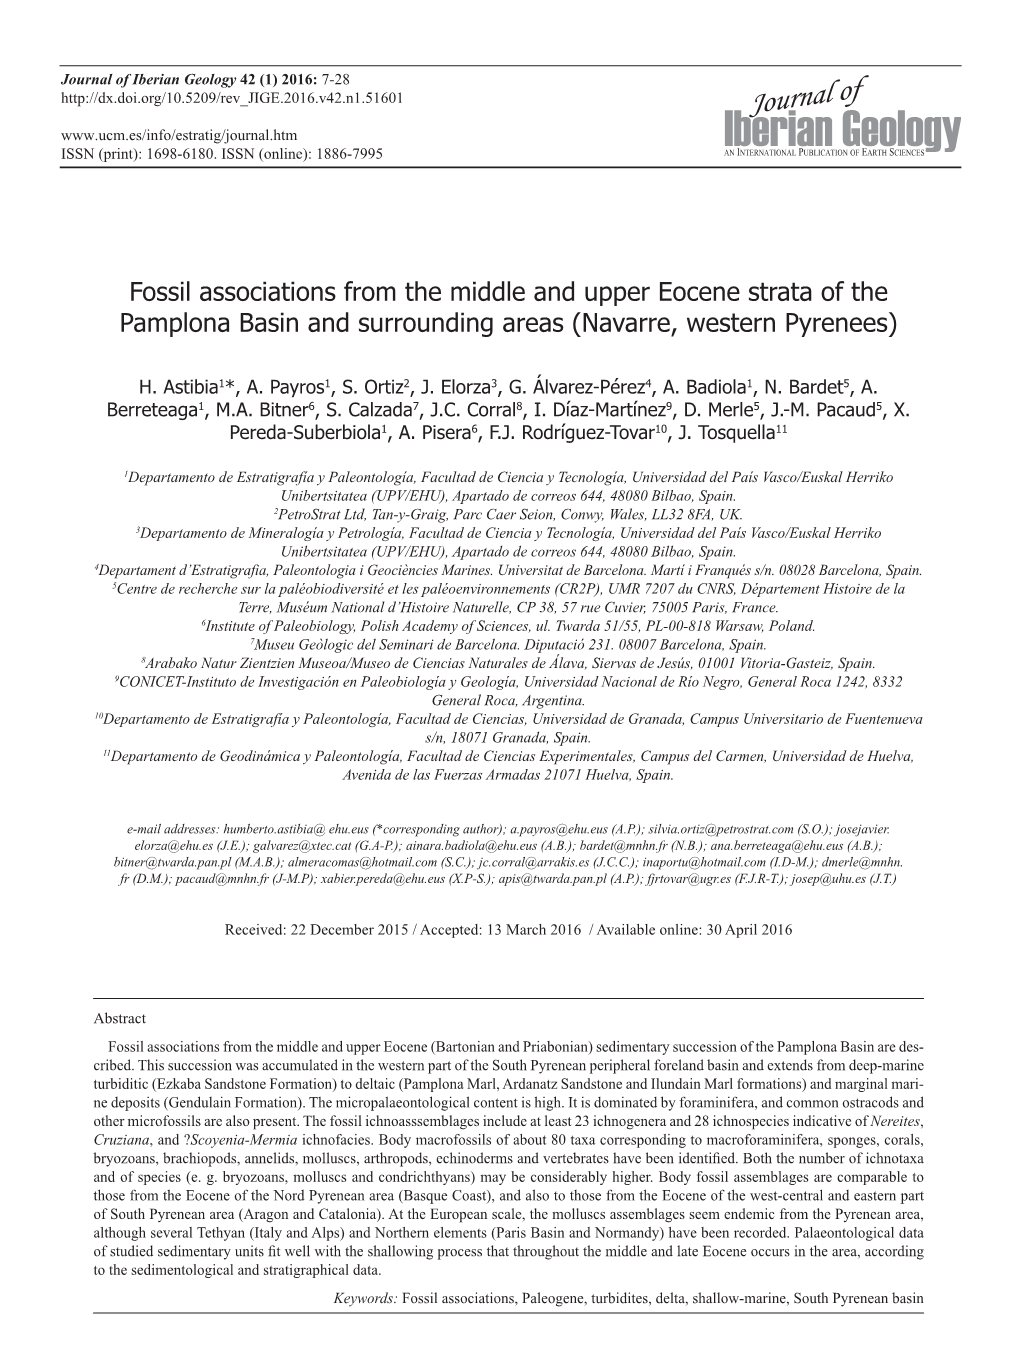 Fossil Associations from the Middle and Upper Eocene Strata of the Pamplona Basin and Surrounding Areas (Navarre, Western Pyrenees)